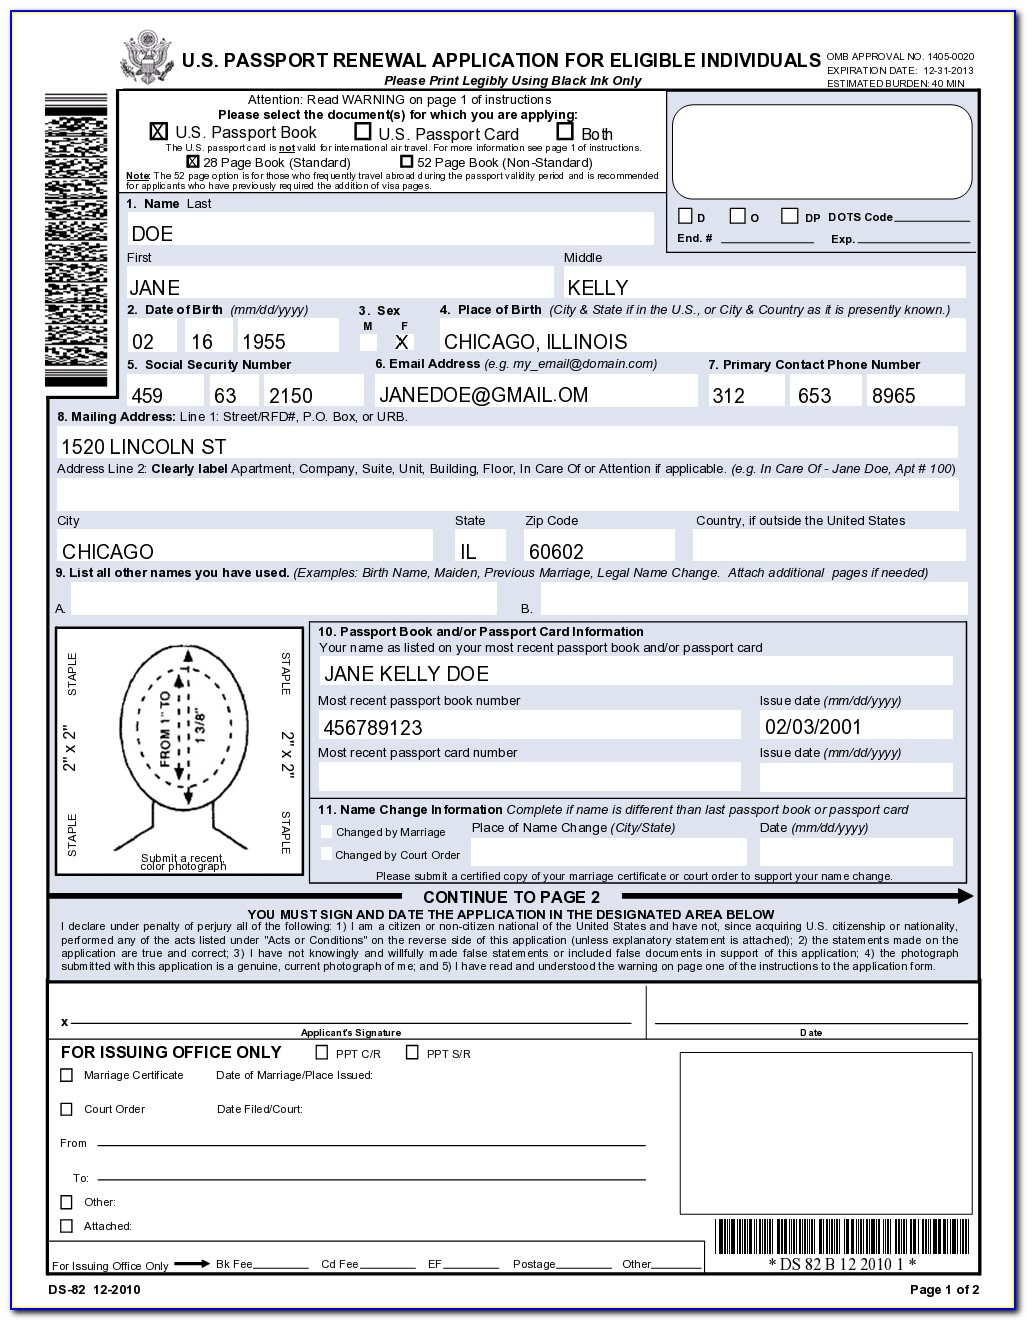 Ds 82 Form Application For Passport Renewal